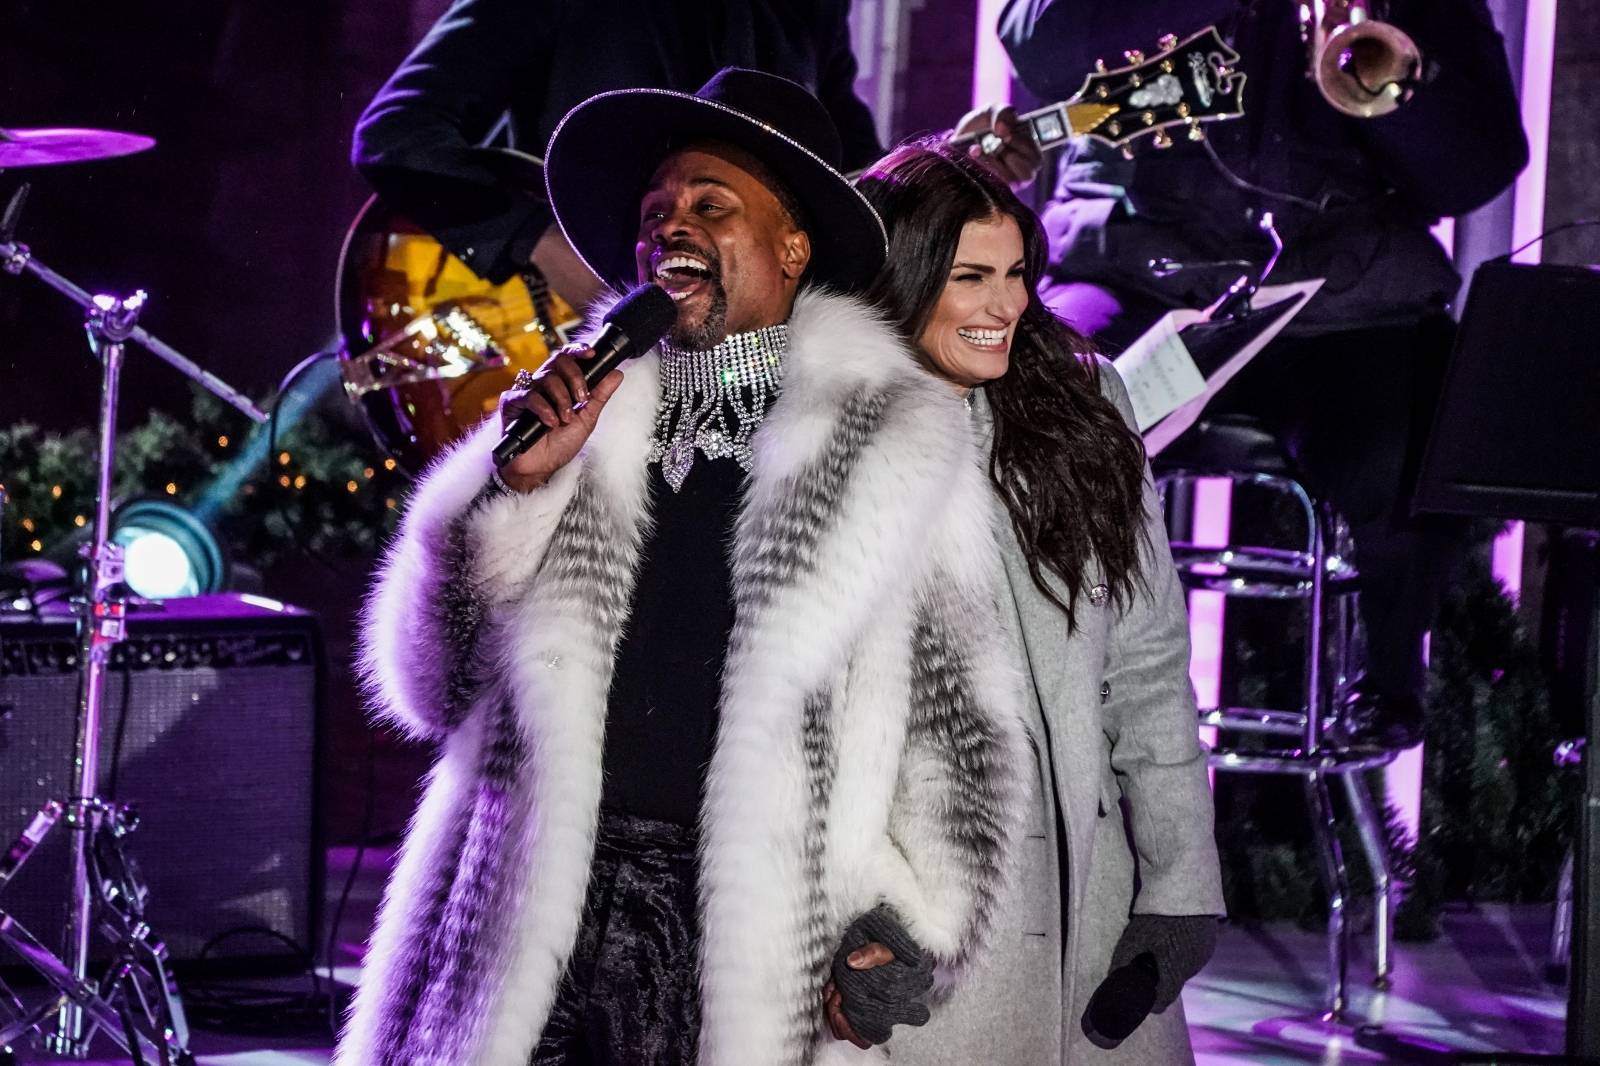 Billy Porter and Idina Menzel perform during the Christmas tree lighting show at Rockefeller Center in the Manhattan borough of New York City